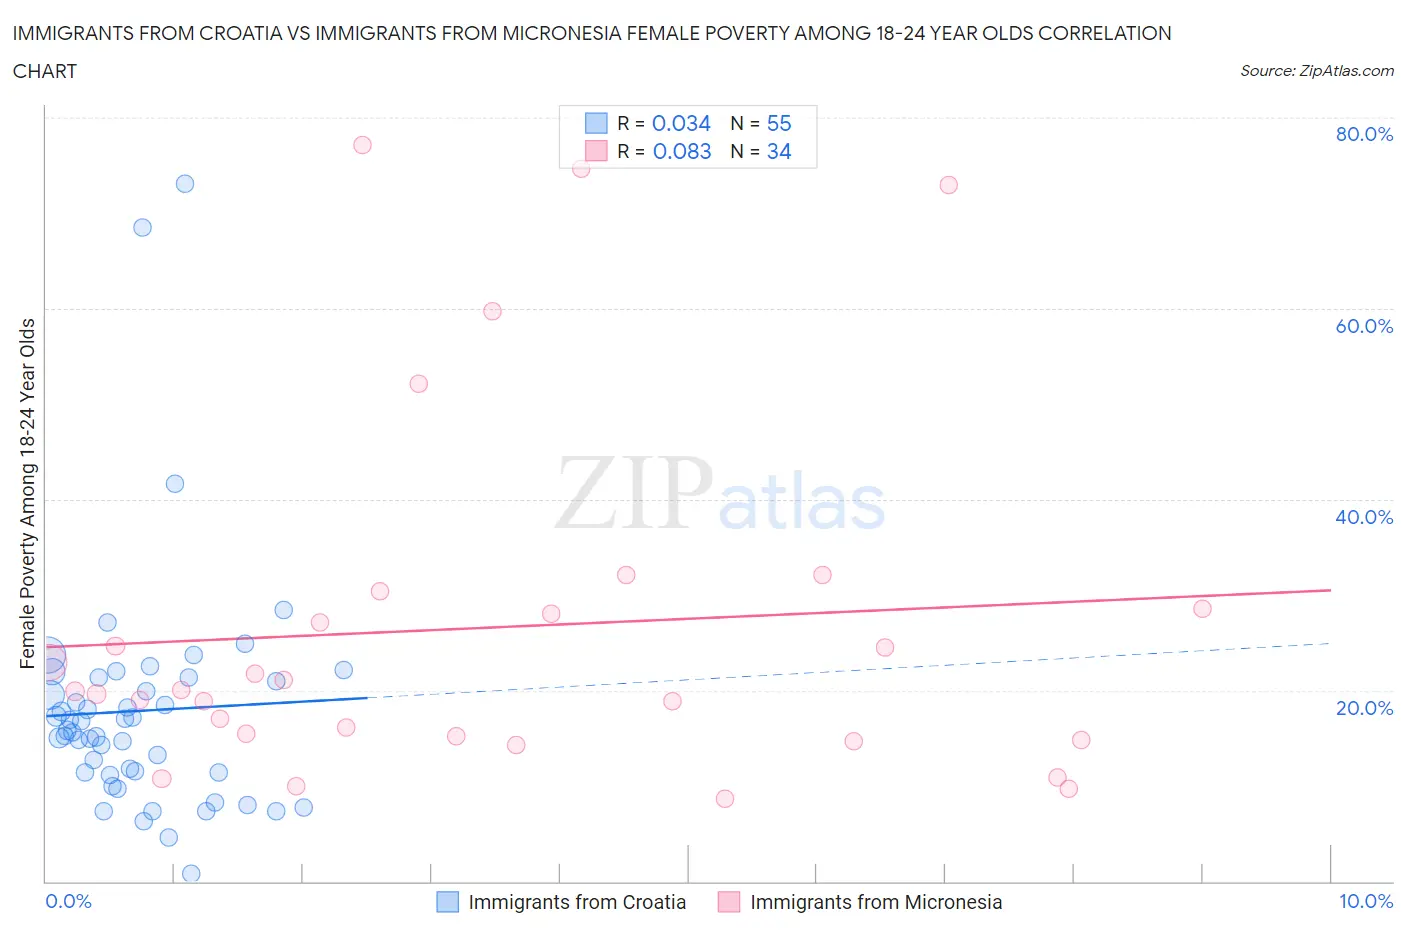 Immigrants from Croatia vs Immigrants from Micronesia Female Poverty Among 18-24 Year Olds